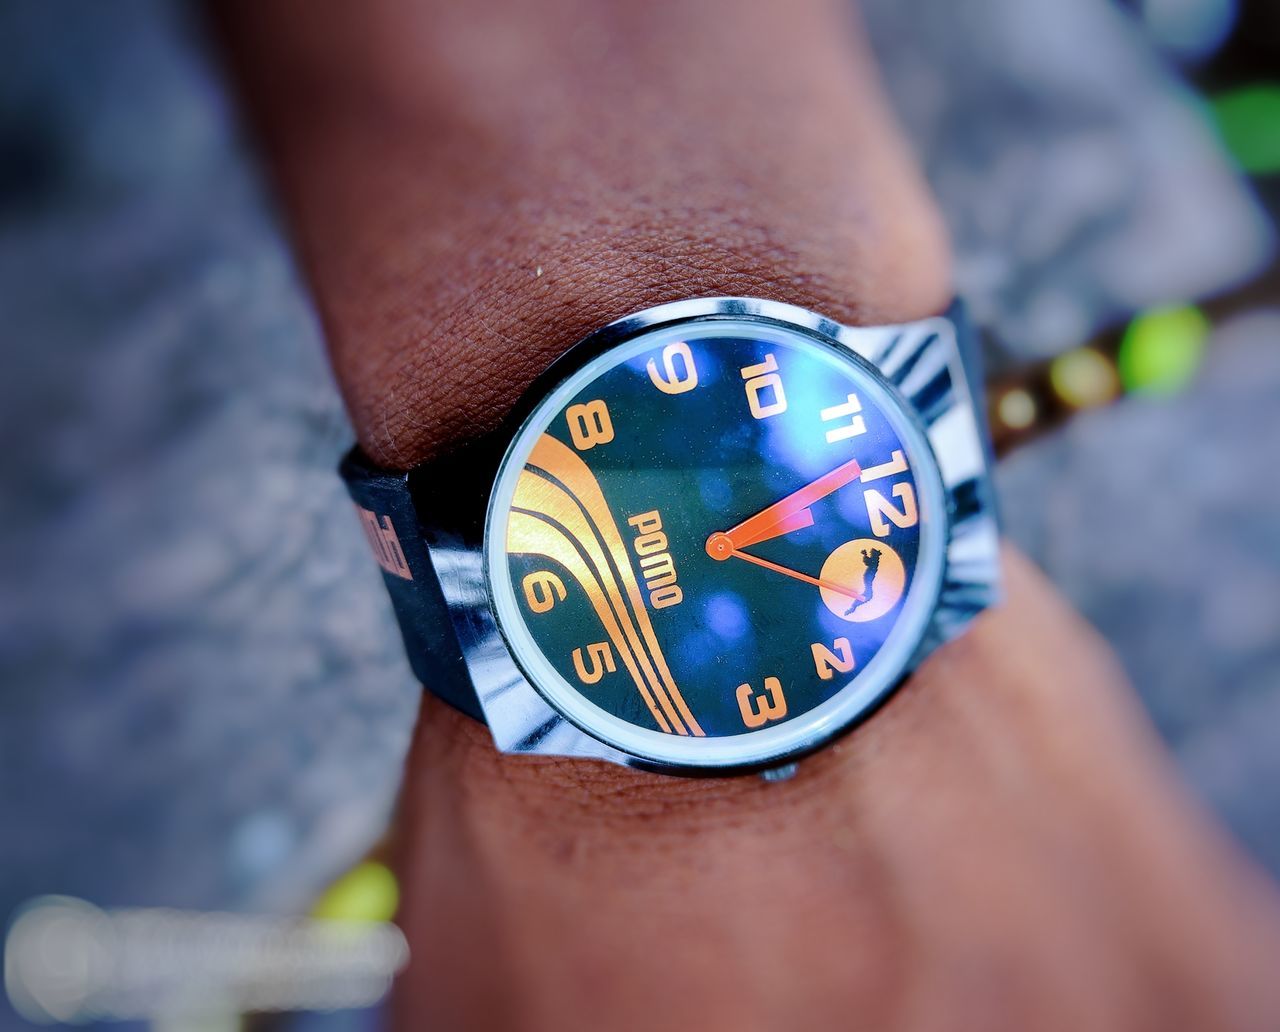 watch, blue, time, wristwatch, clock, close-up, one person, hand, adult, strap, human joint, yellow, instrument of time, accuracy, men, checking the time, lifestyles, day, outdoors